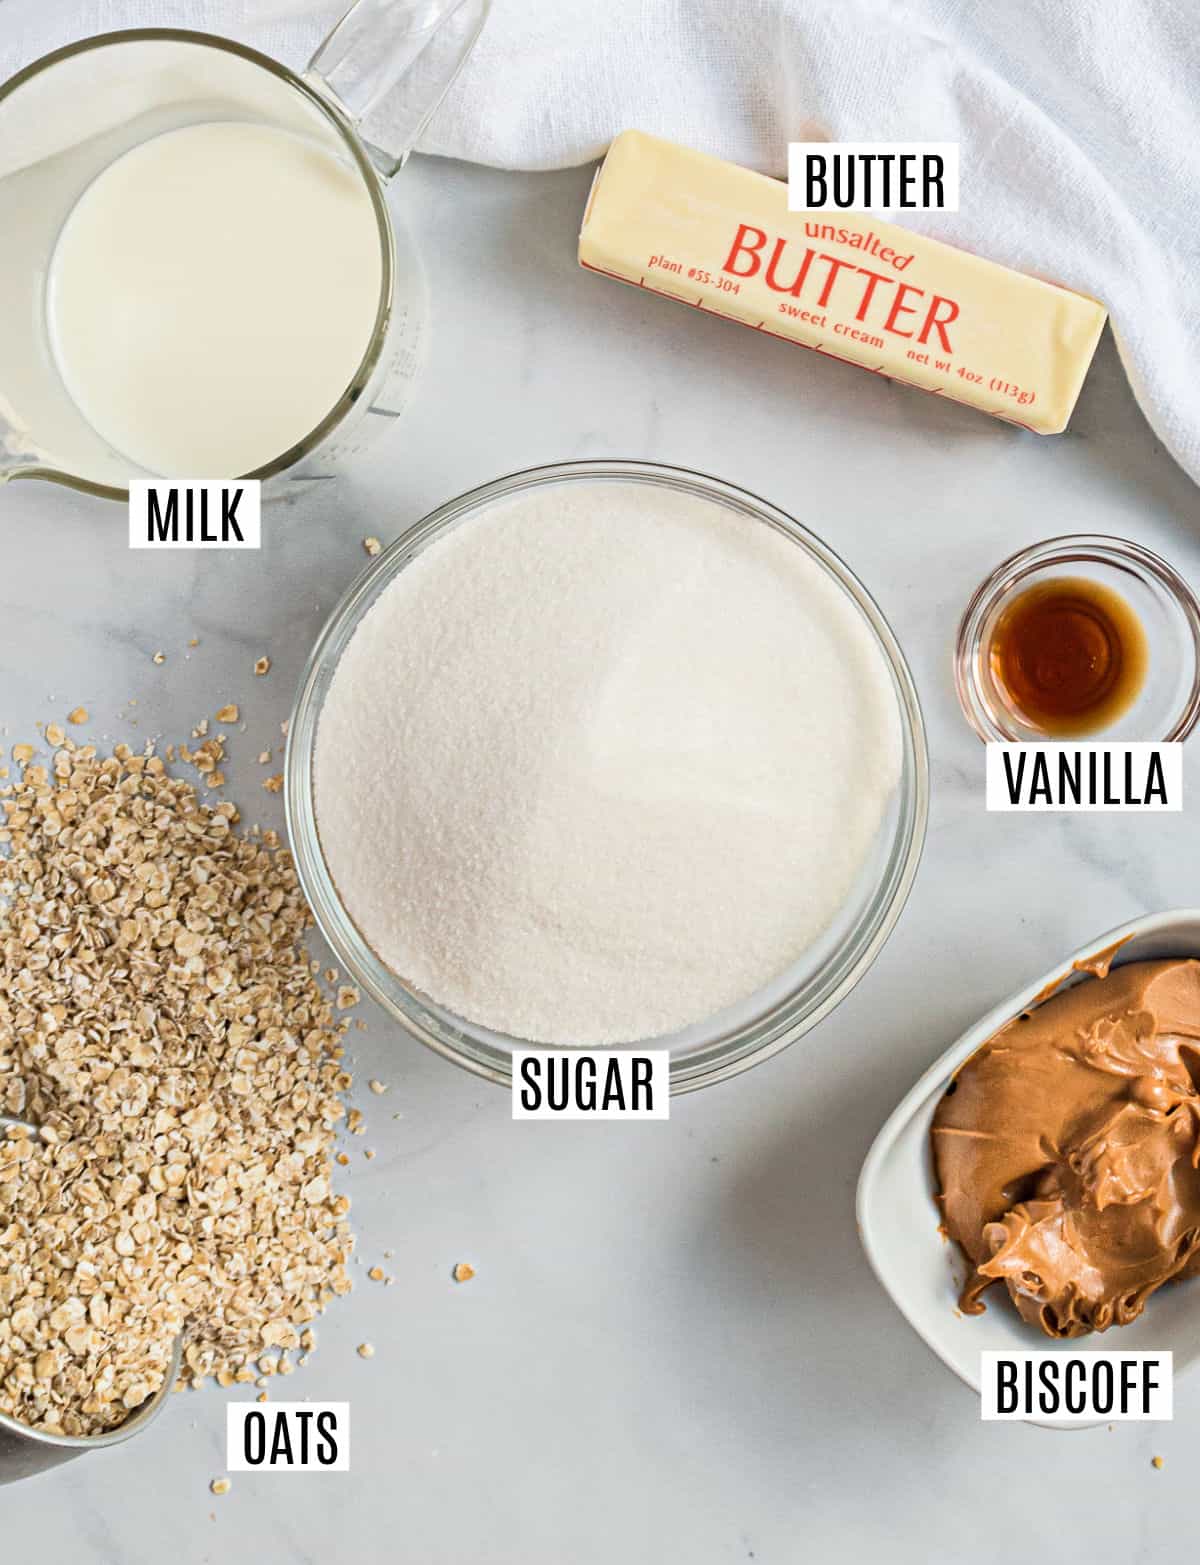 Ingredients needed to make no bake cookies with Biscoff.